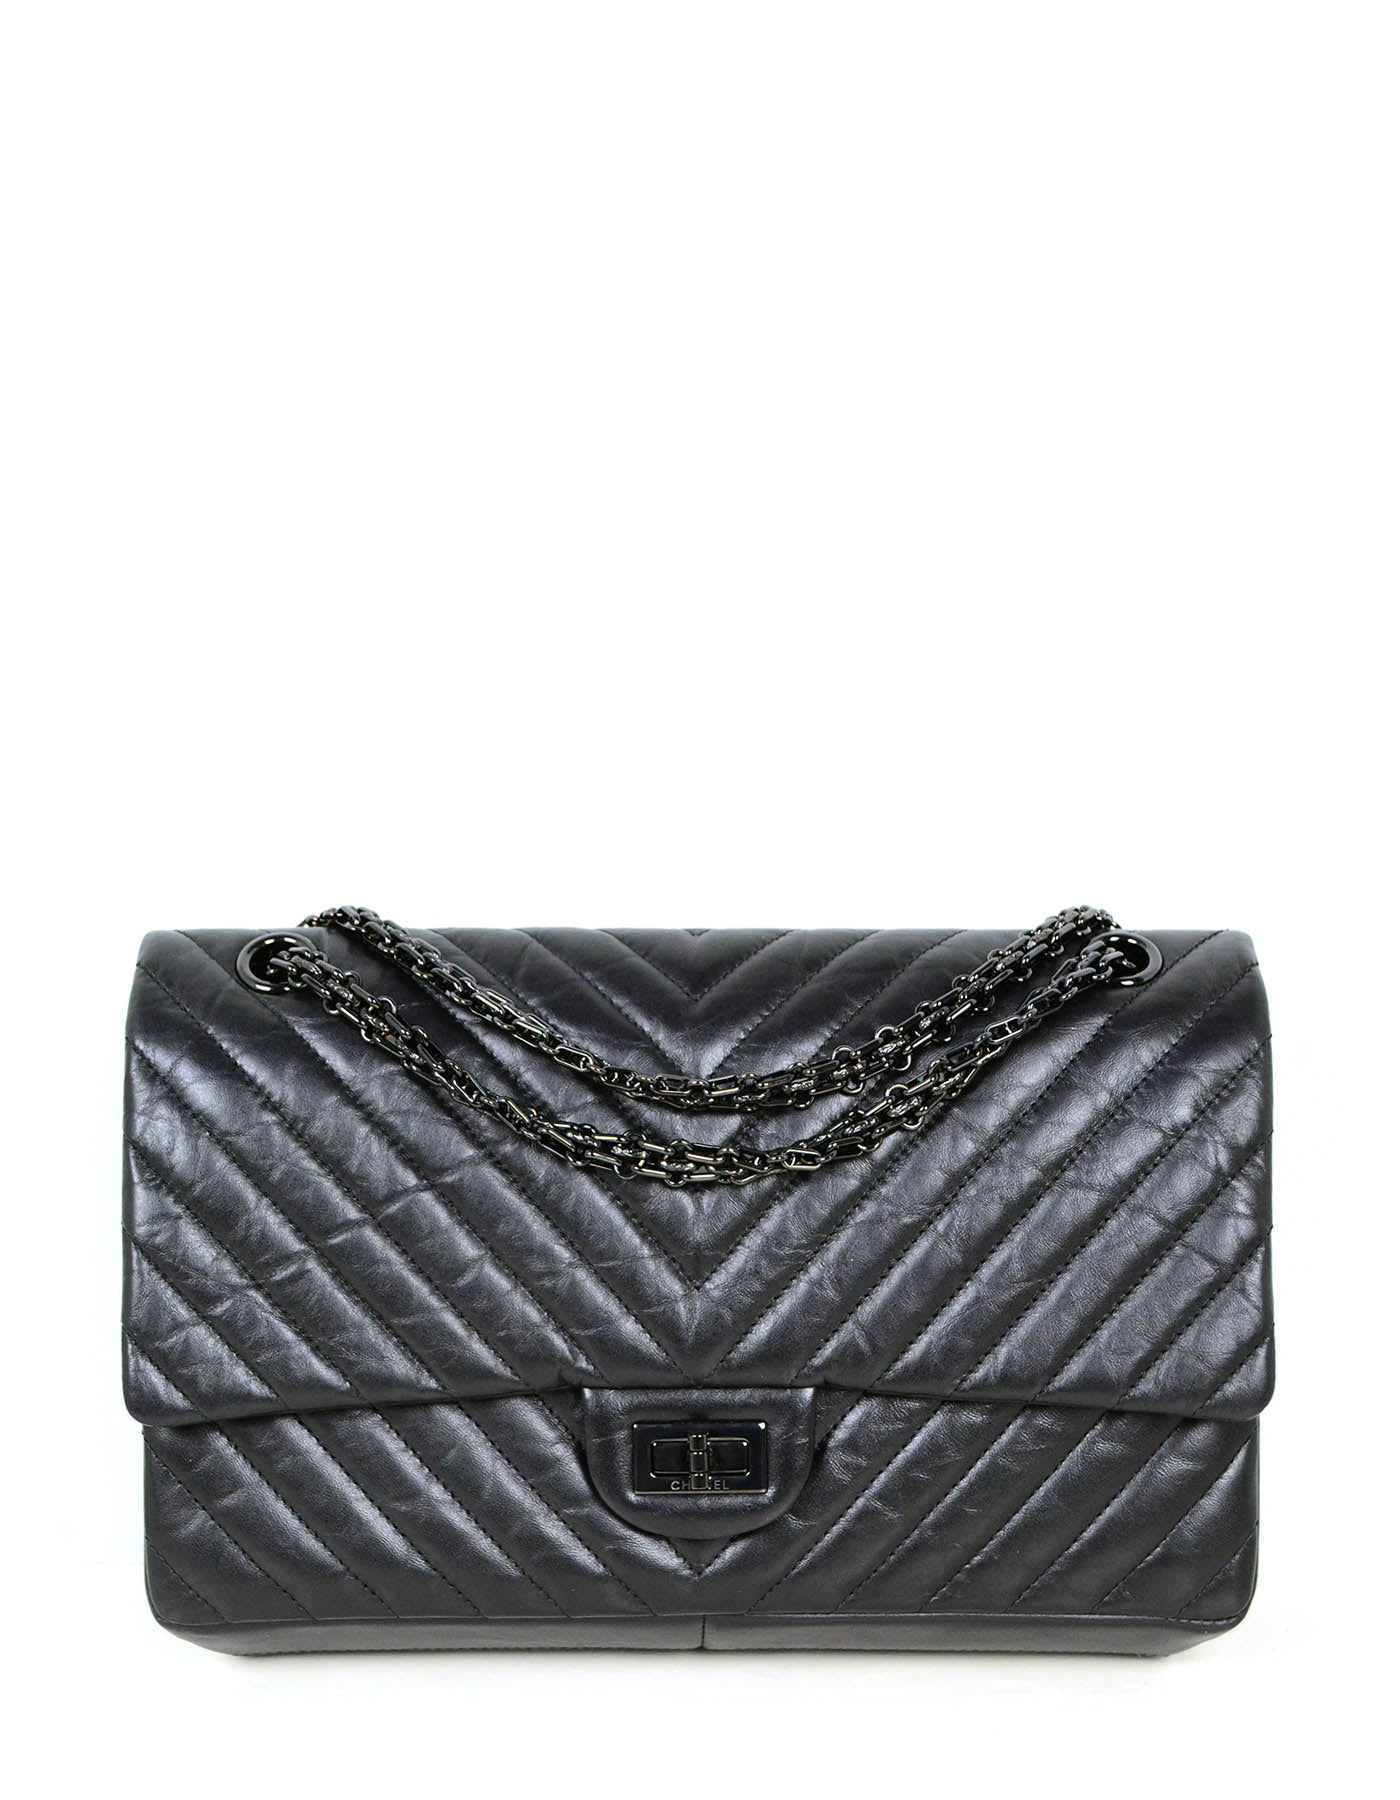 Chanel So Black Calfskin Quilted 2.55 Reissue 226 Flap Bag